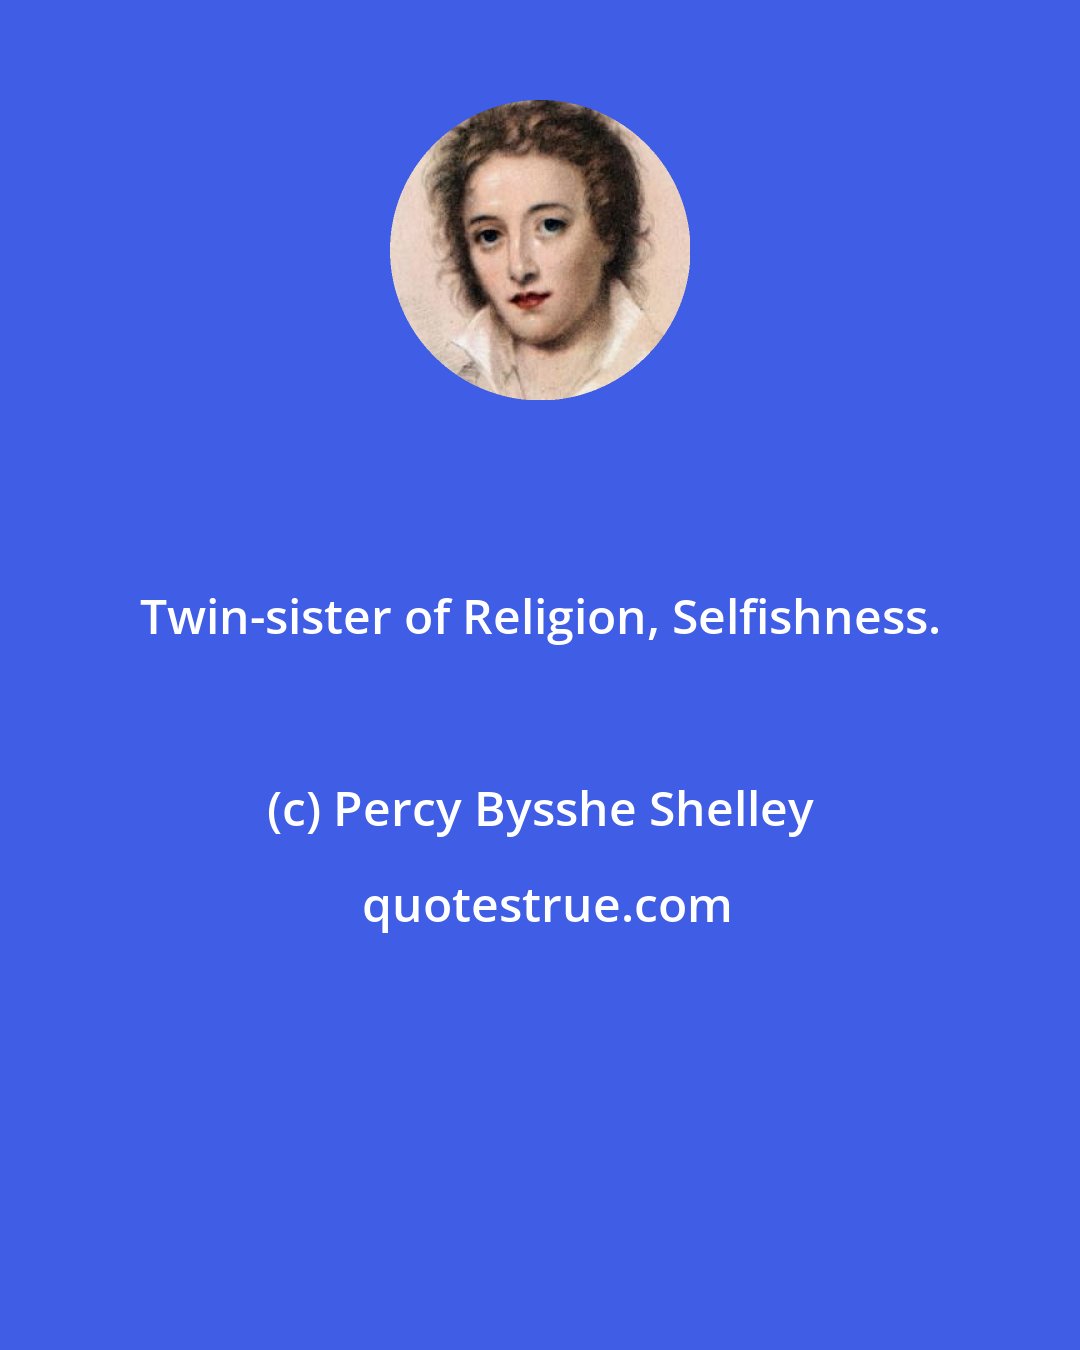 Percy Bysshe Shelley: Twin-sister of Religion, Selfishness.